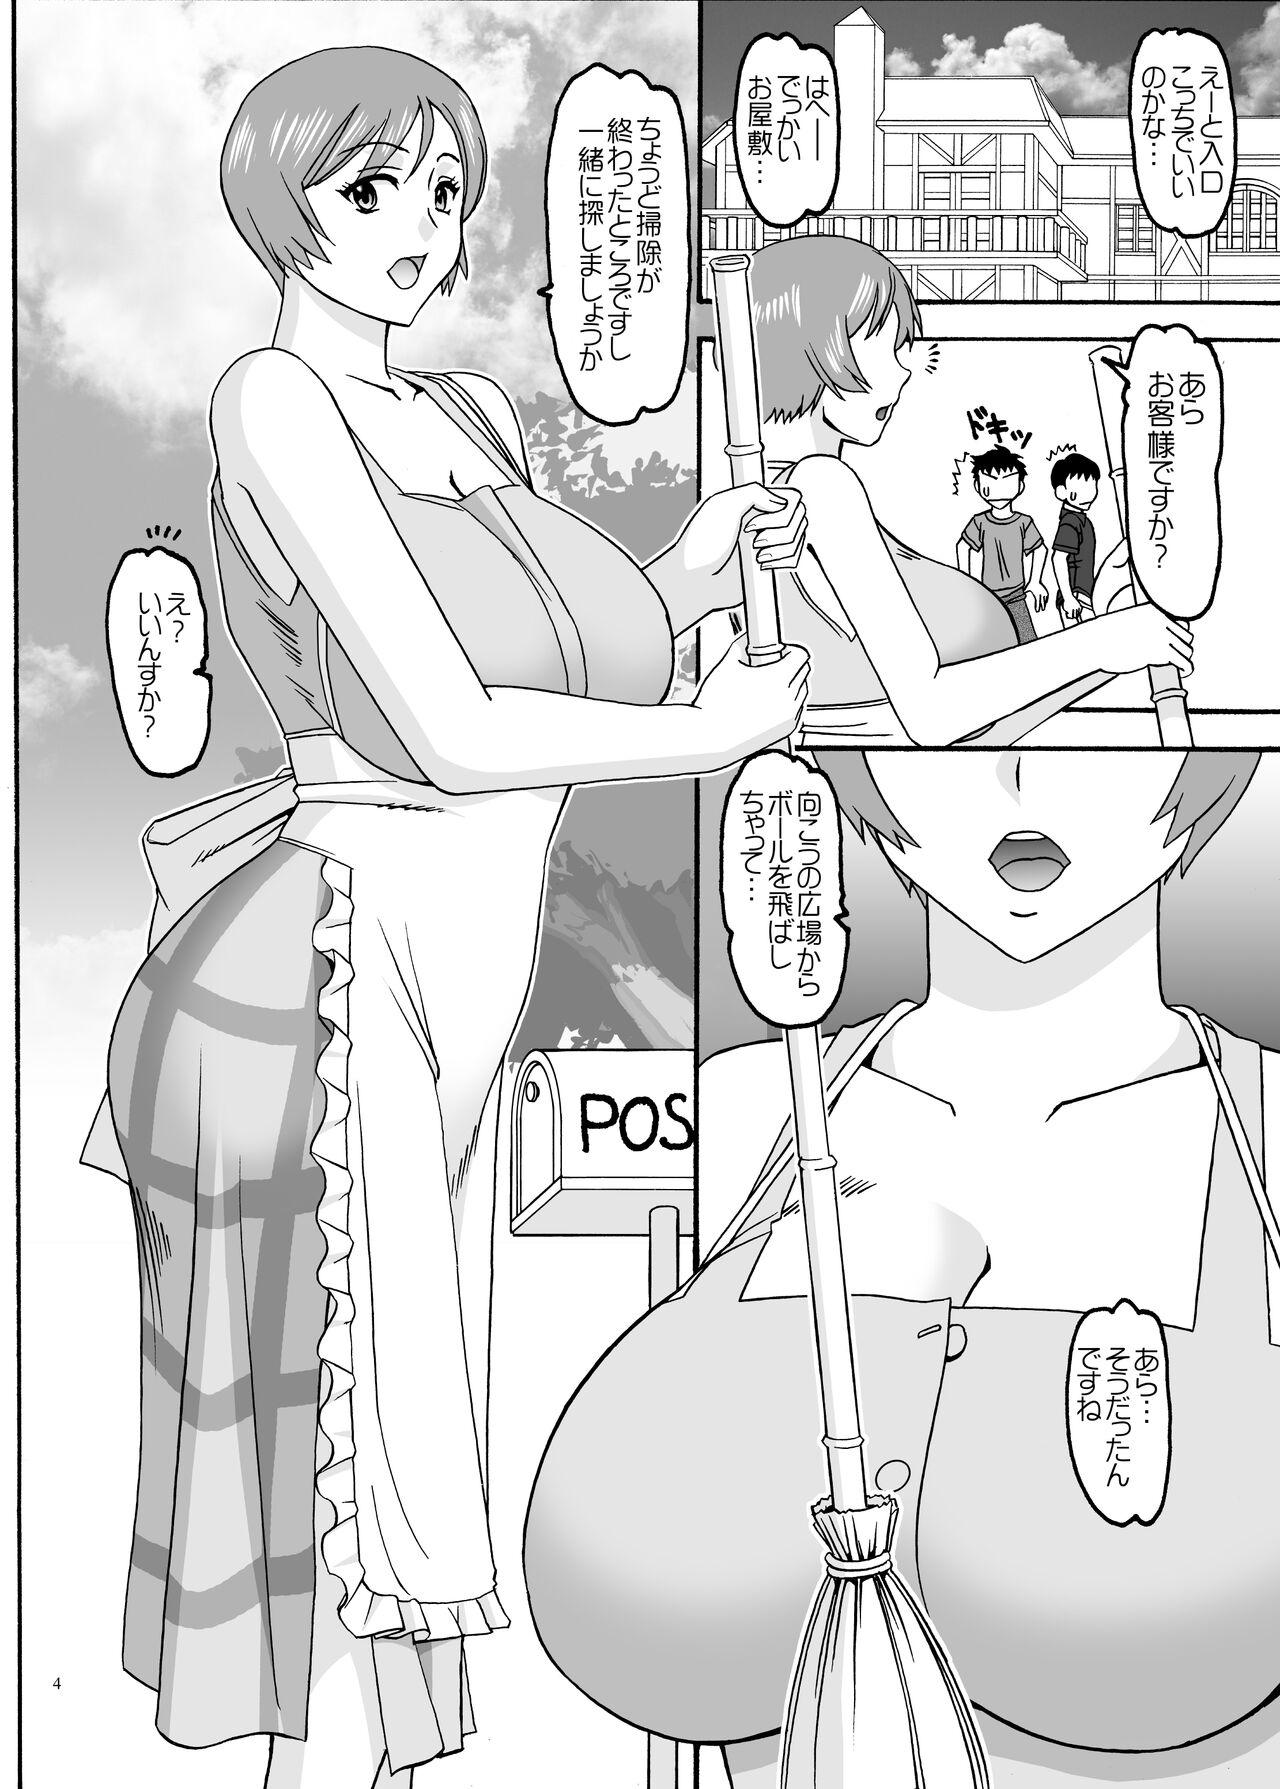 Pounded Housekeeper and Shota - Super real mahjong Story - Page 4